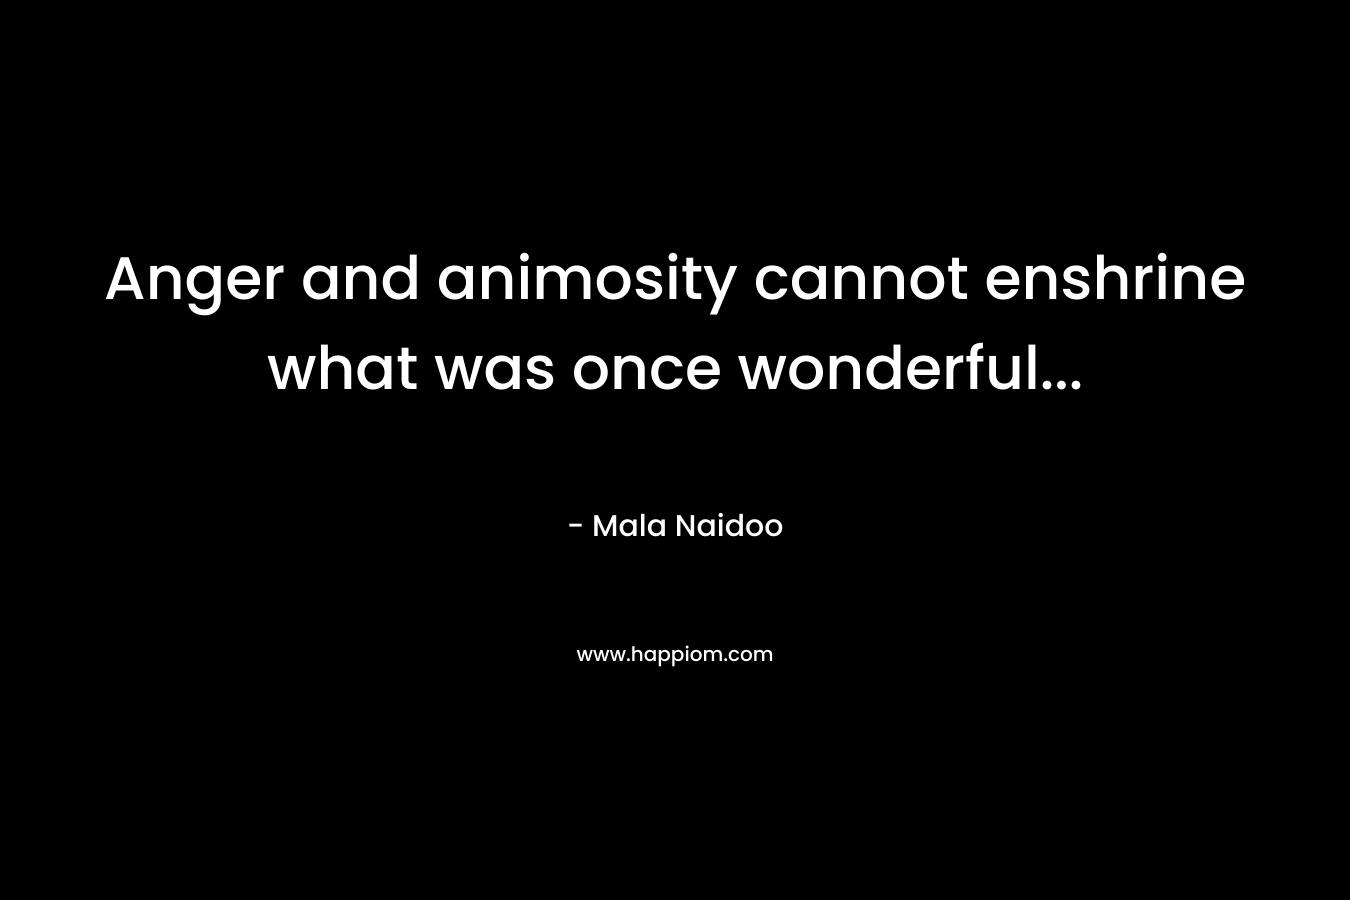 Anger and animosity cannot enshrine what was once wonderful… – Mala Naidoo